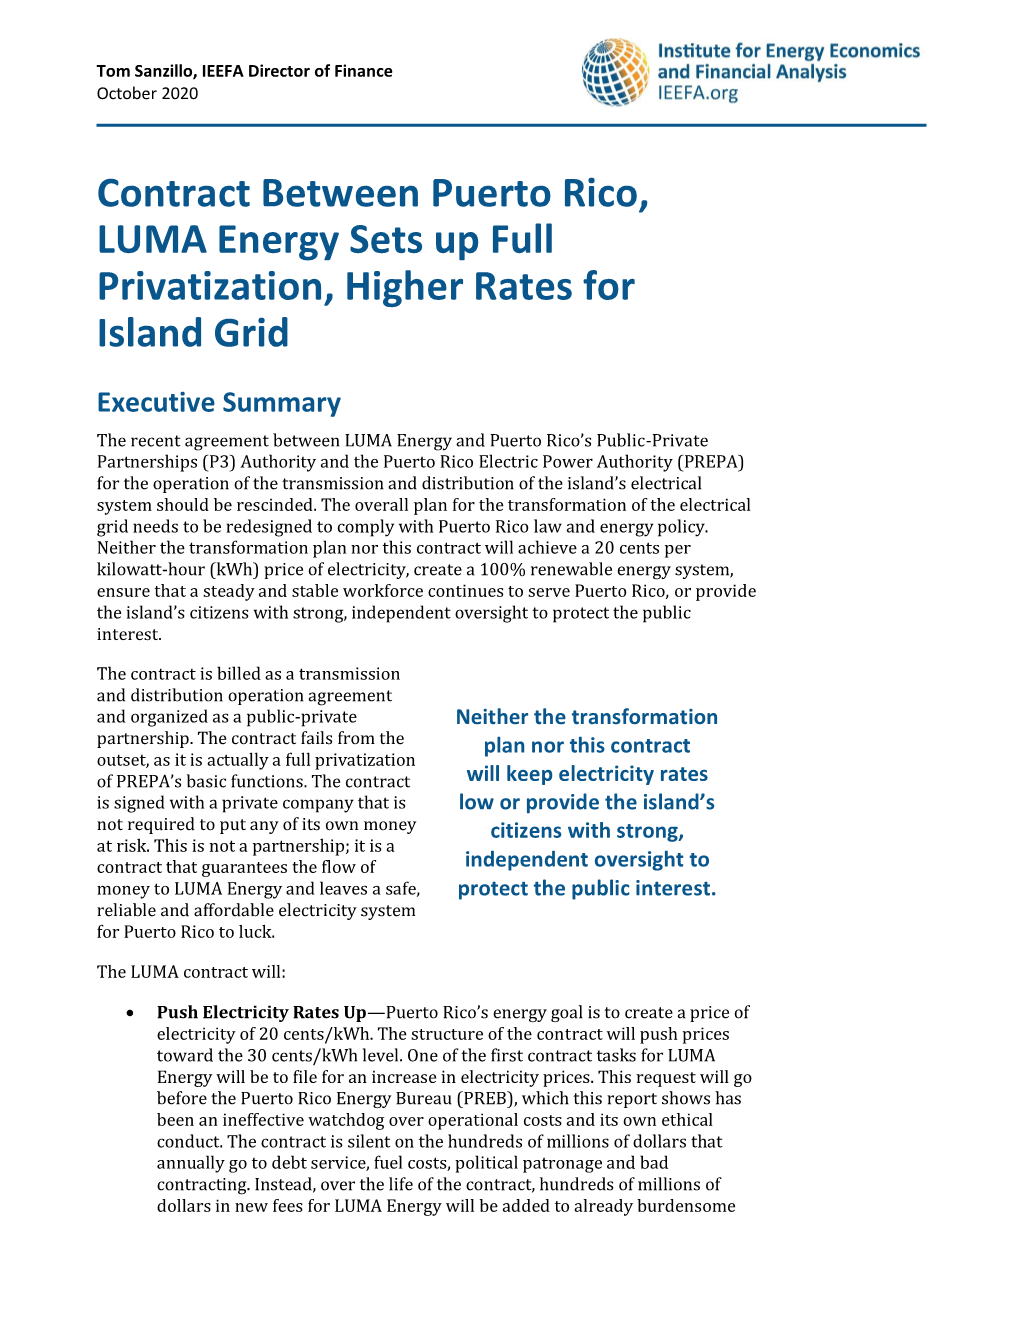 Contract Between Puerto Rico, LUMA Energy Sets up Full Privatization, Higher Rates for Island Grid